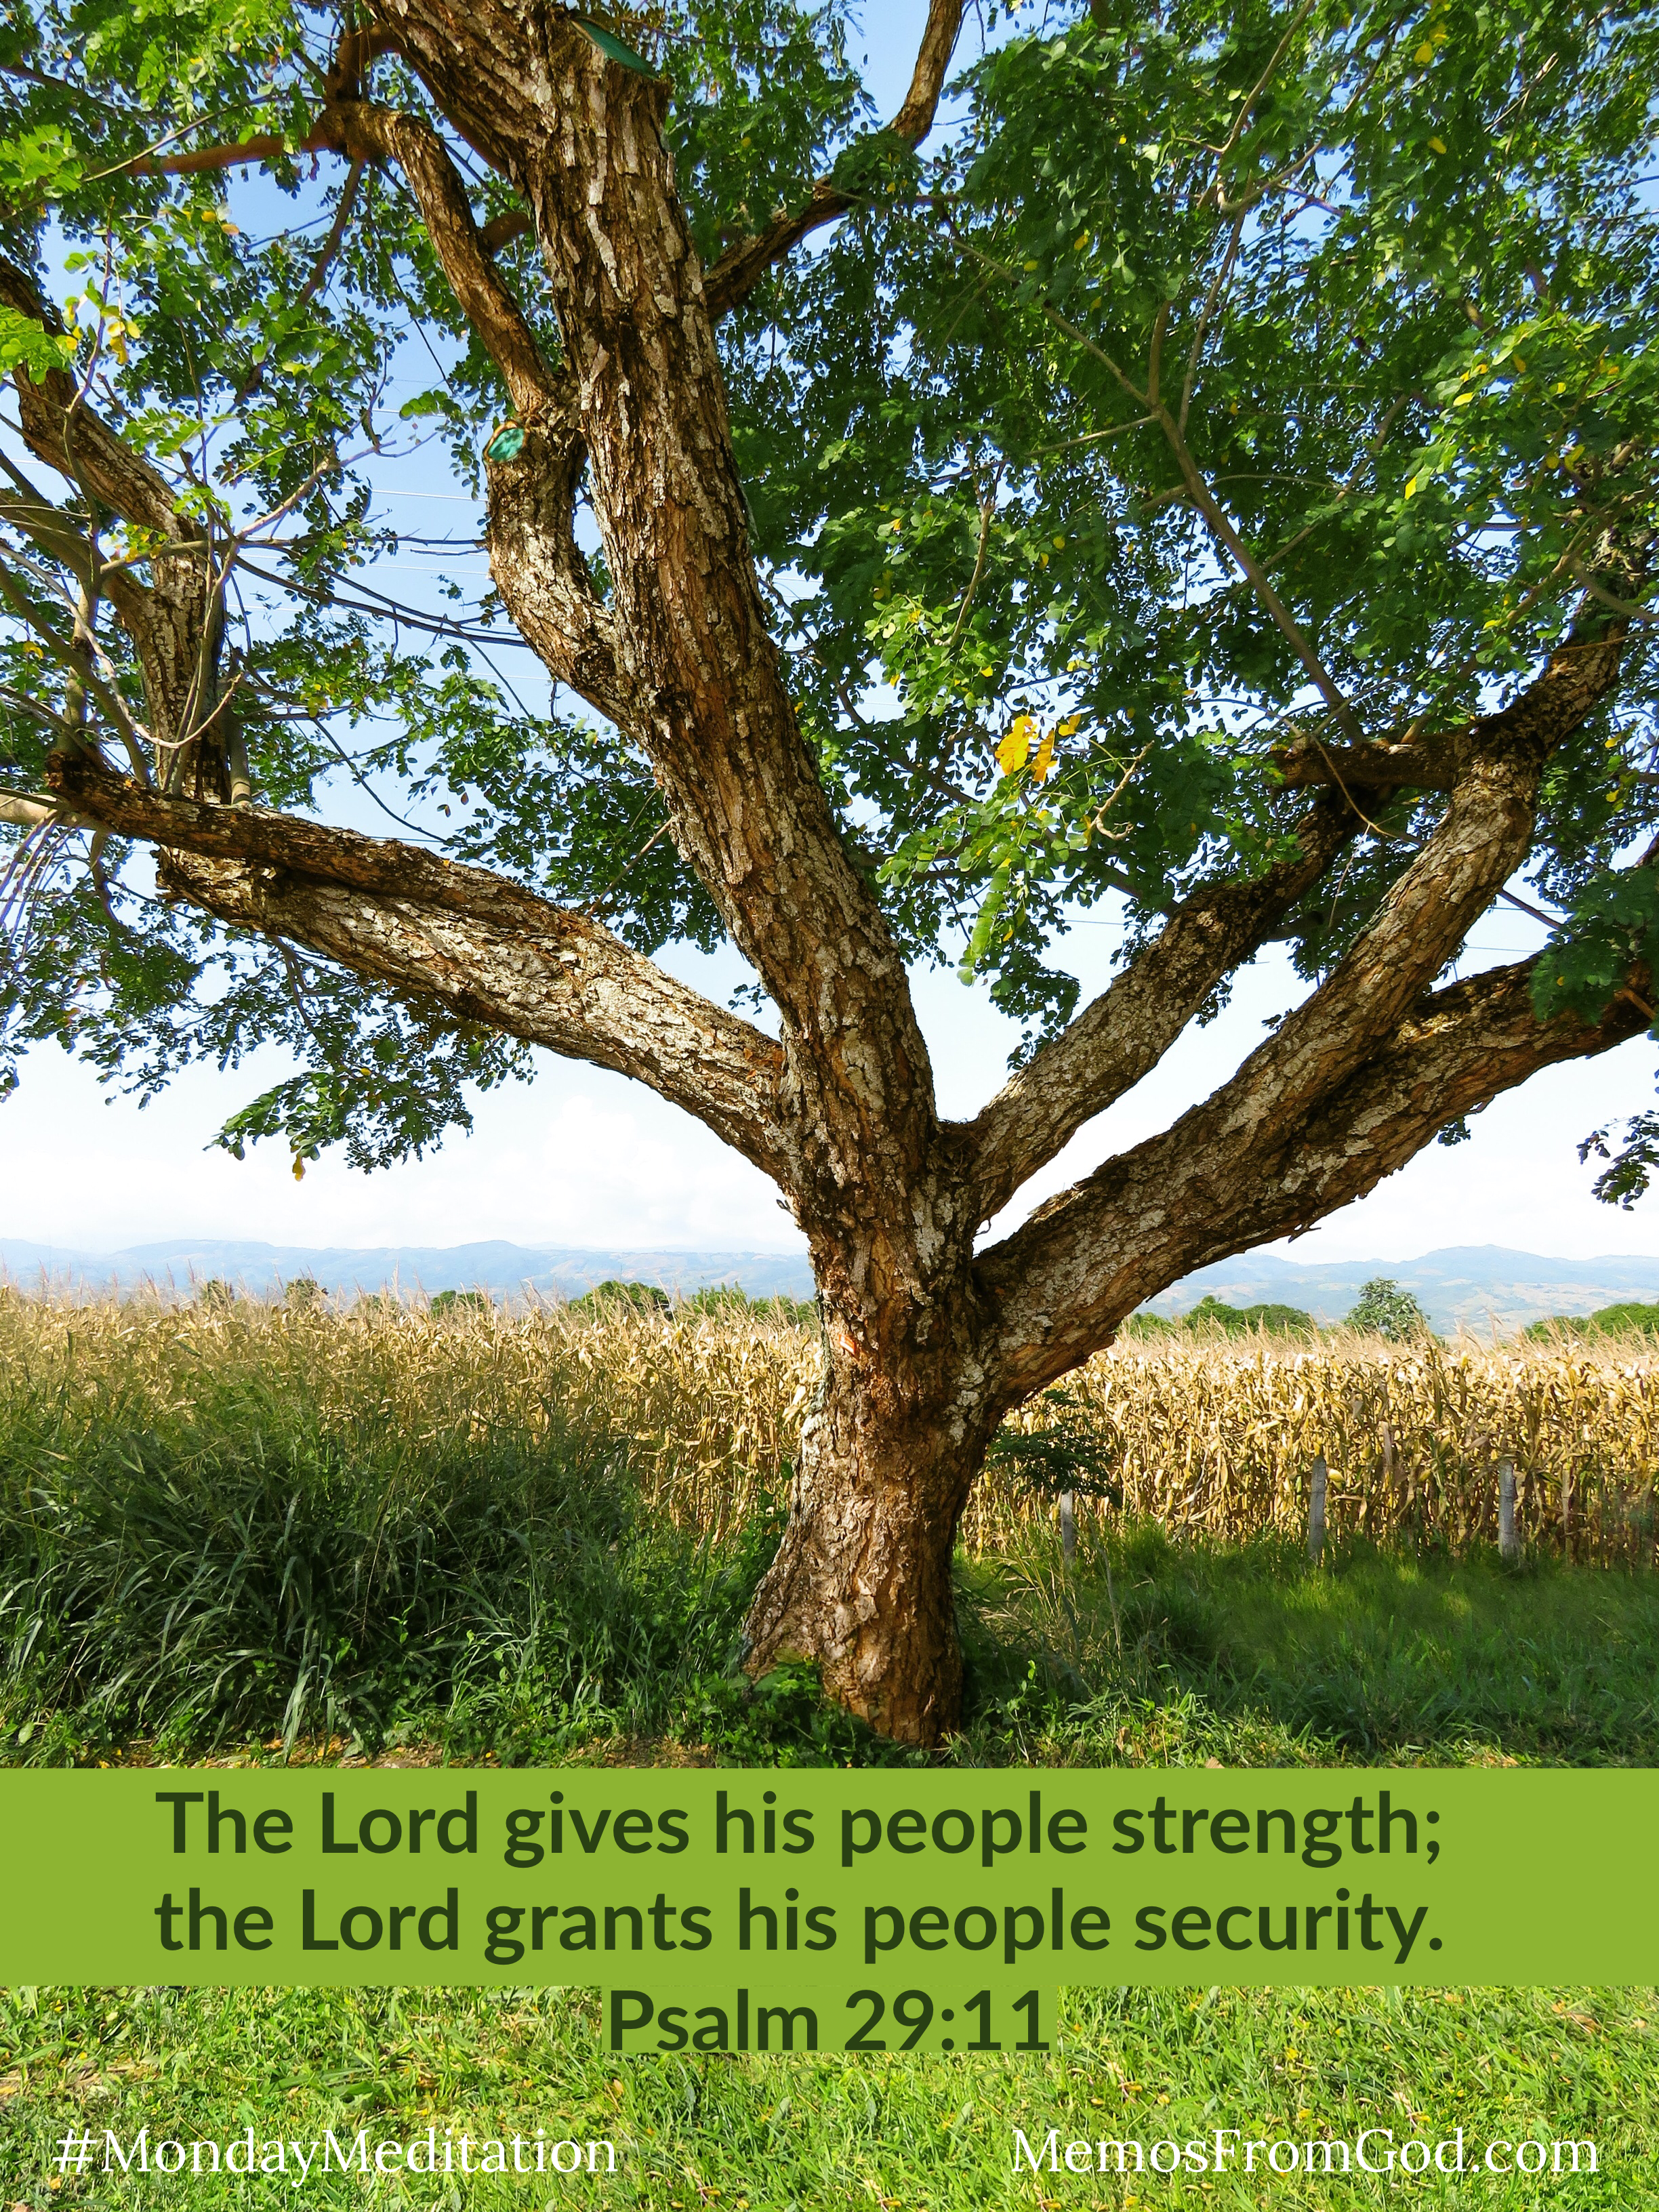 One tree with a short trunk, strong branches, and green leaves growing between a corn field and a grassy area. Caption: The Lord gives his people strength; the Lord grants his people security. Psalm 29:11